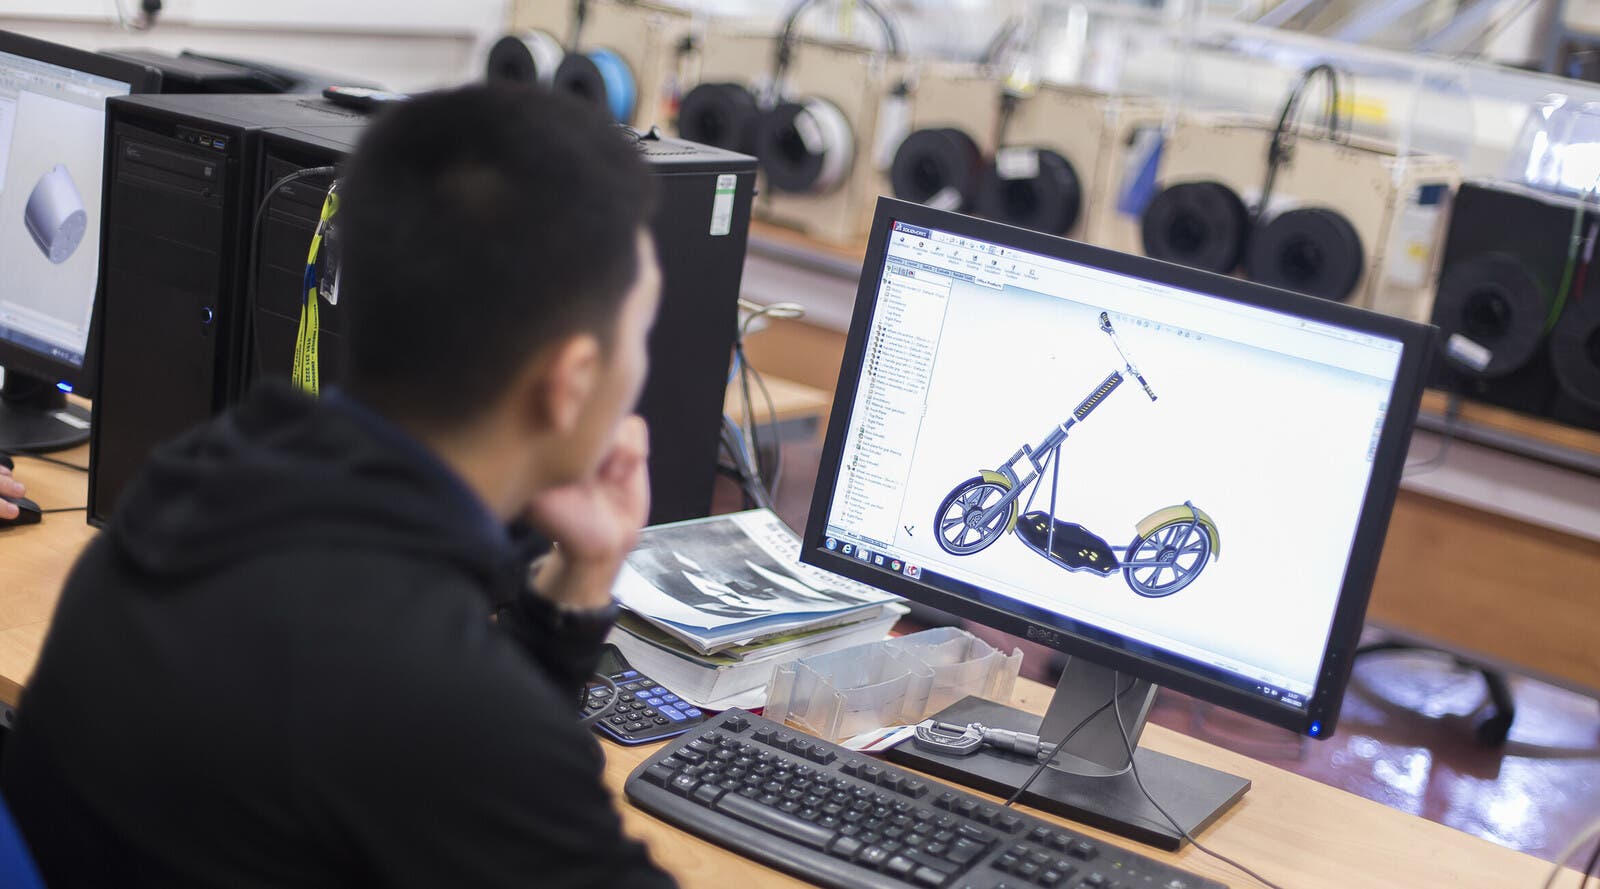 A student working on an engineering project.